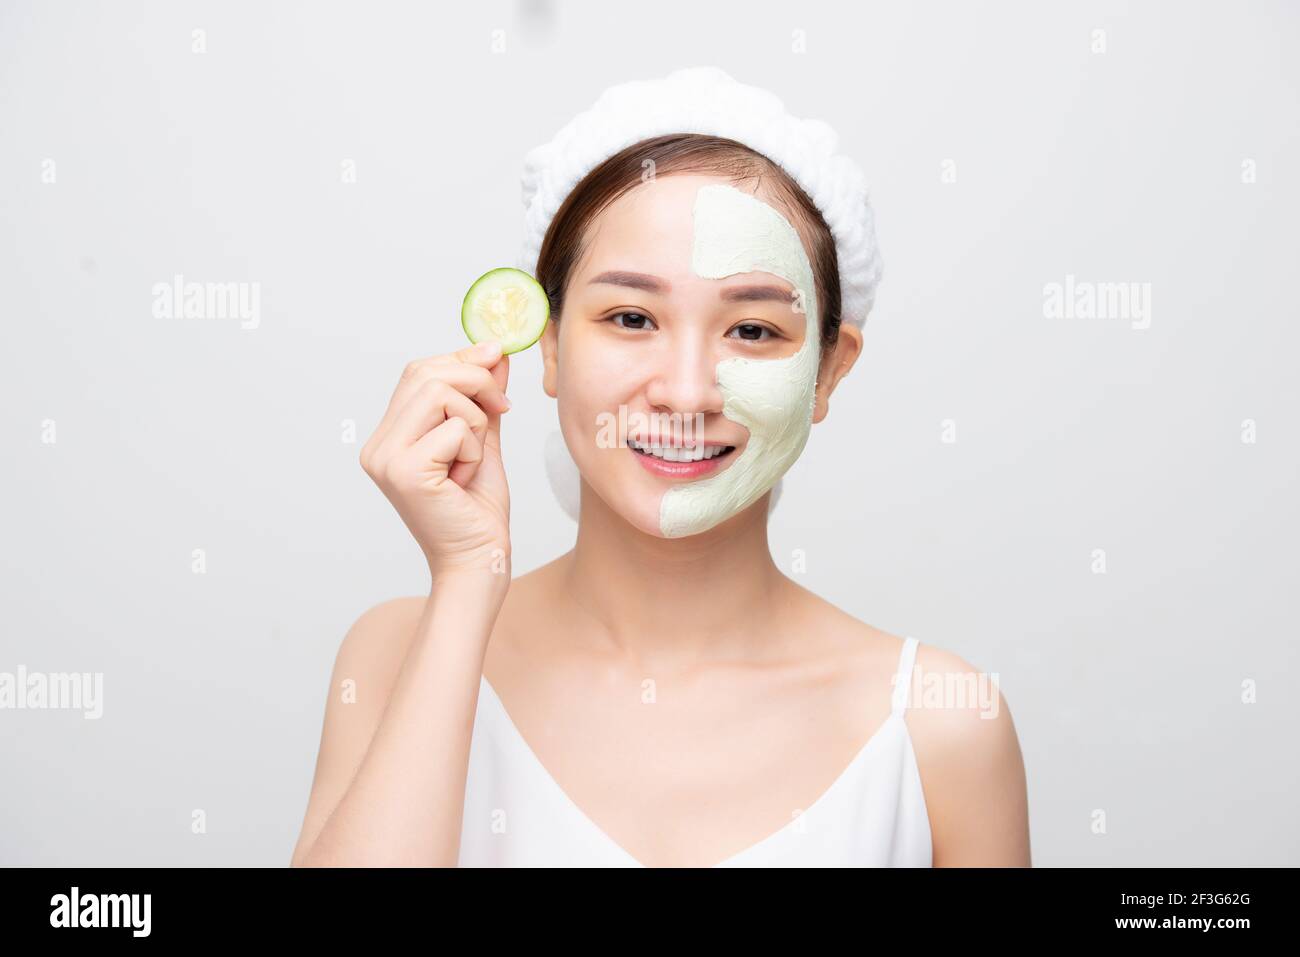 Attractive young Asian woman with clay mask and holding fruit piece isolated over white background. Beauty concept. Stock Photo